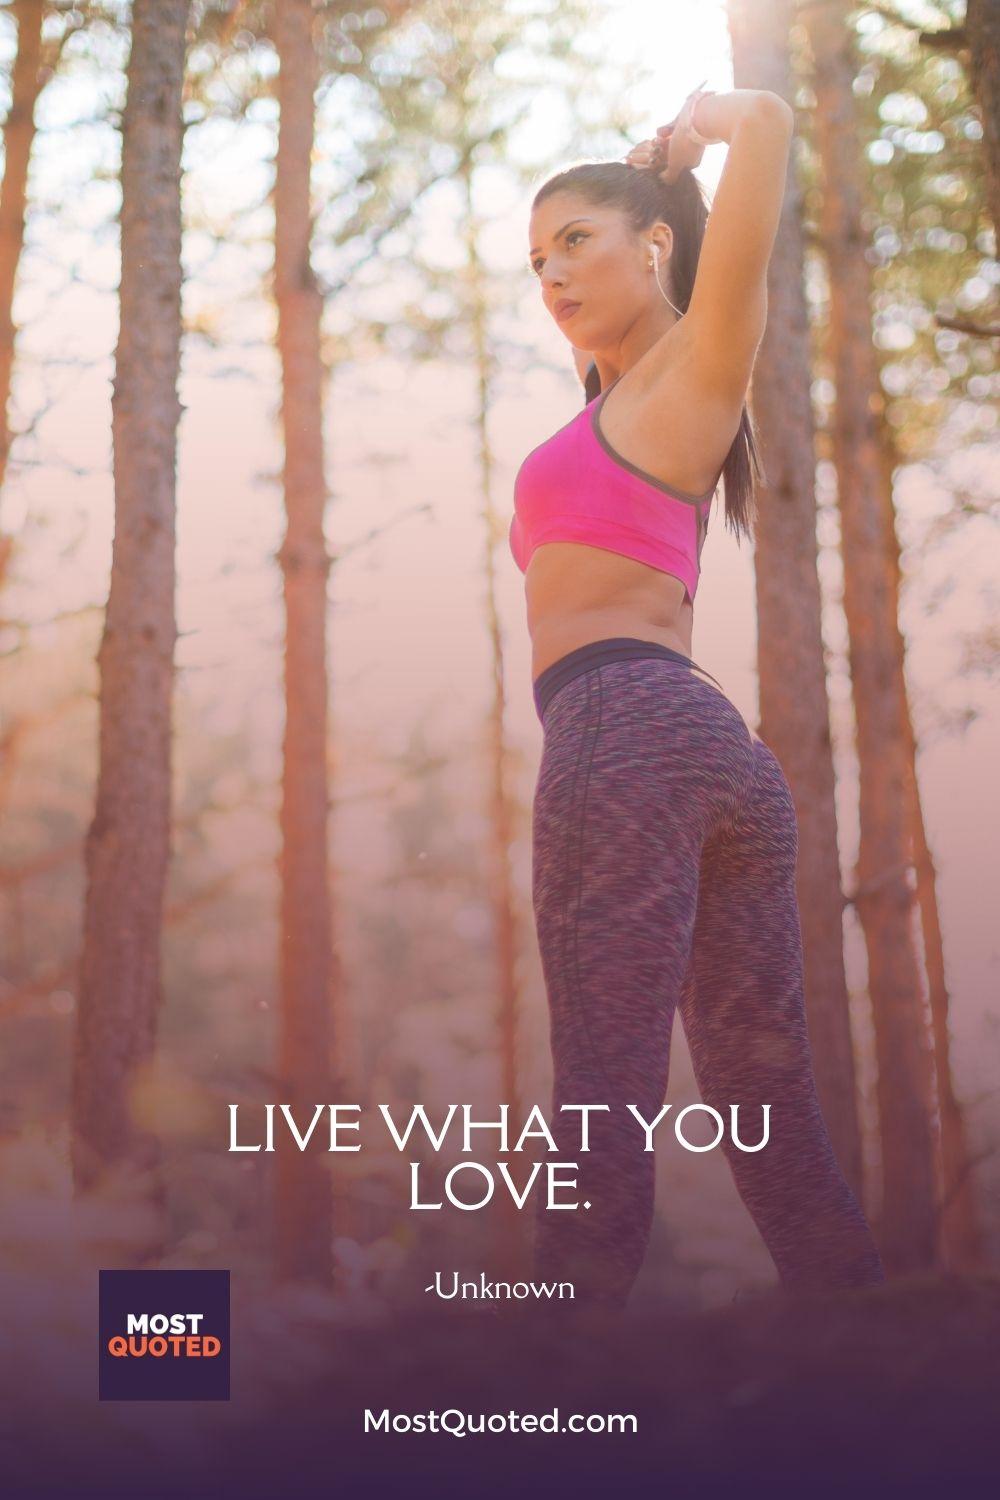 Live what you love.